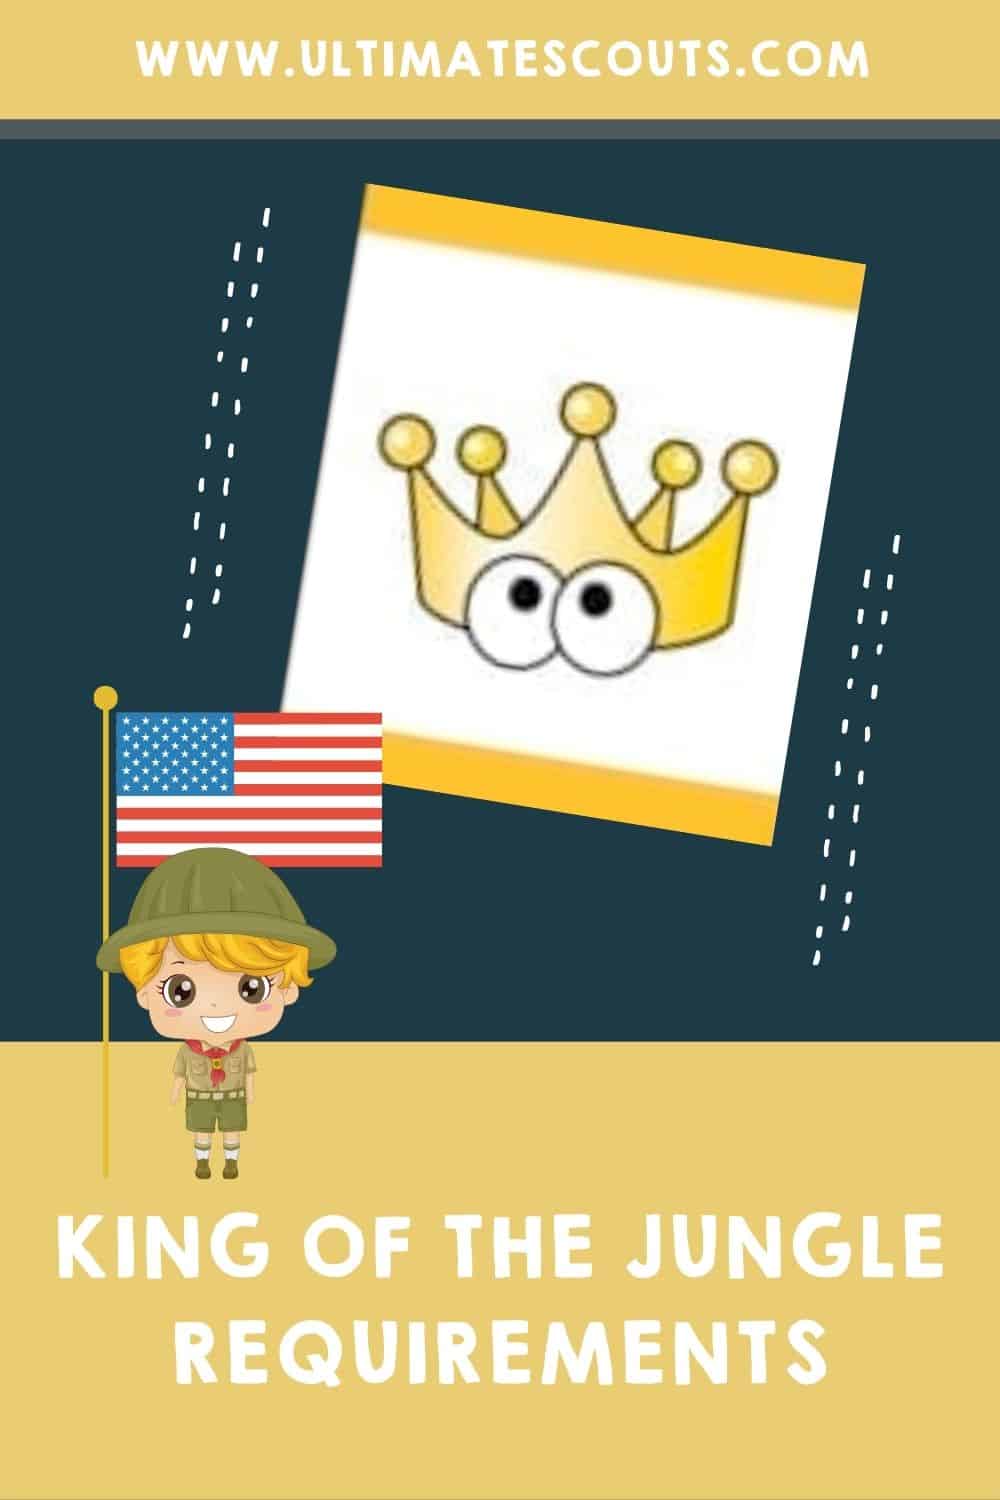 King Of The Jungle for Cub Scouts